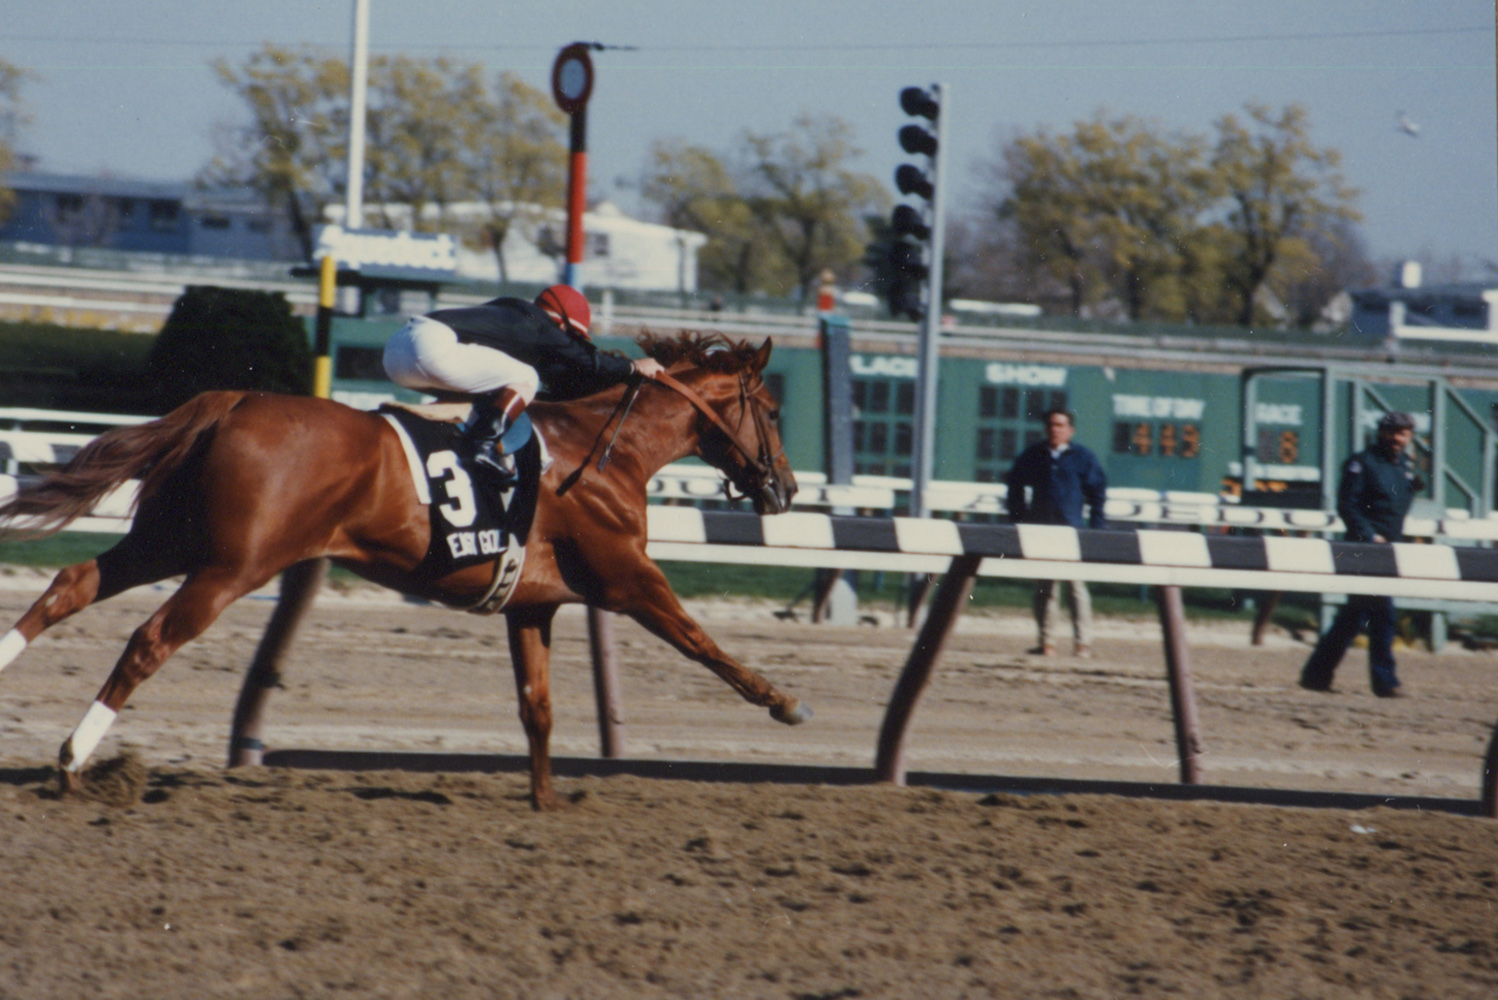 Easy Goer (Pat Day up) after winning the 1989 Wood Memorial at Aqueduct (Mike Pender/Museum Collection)